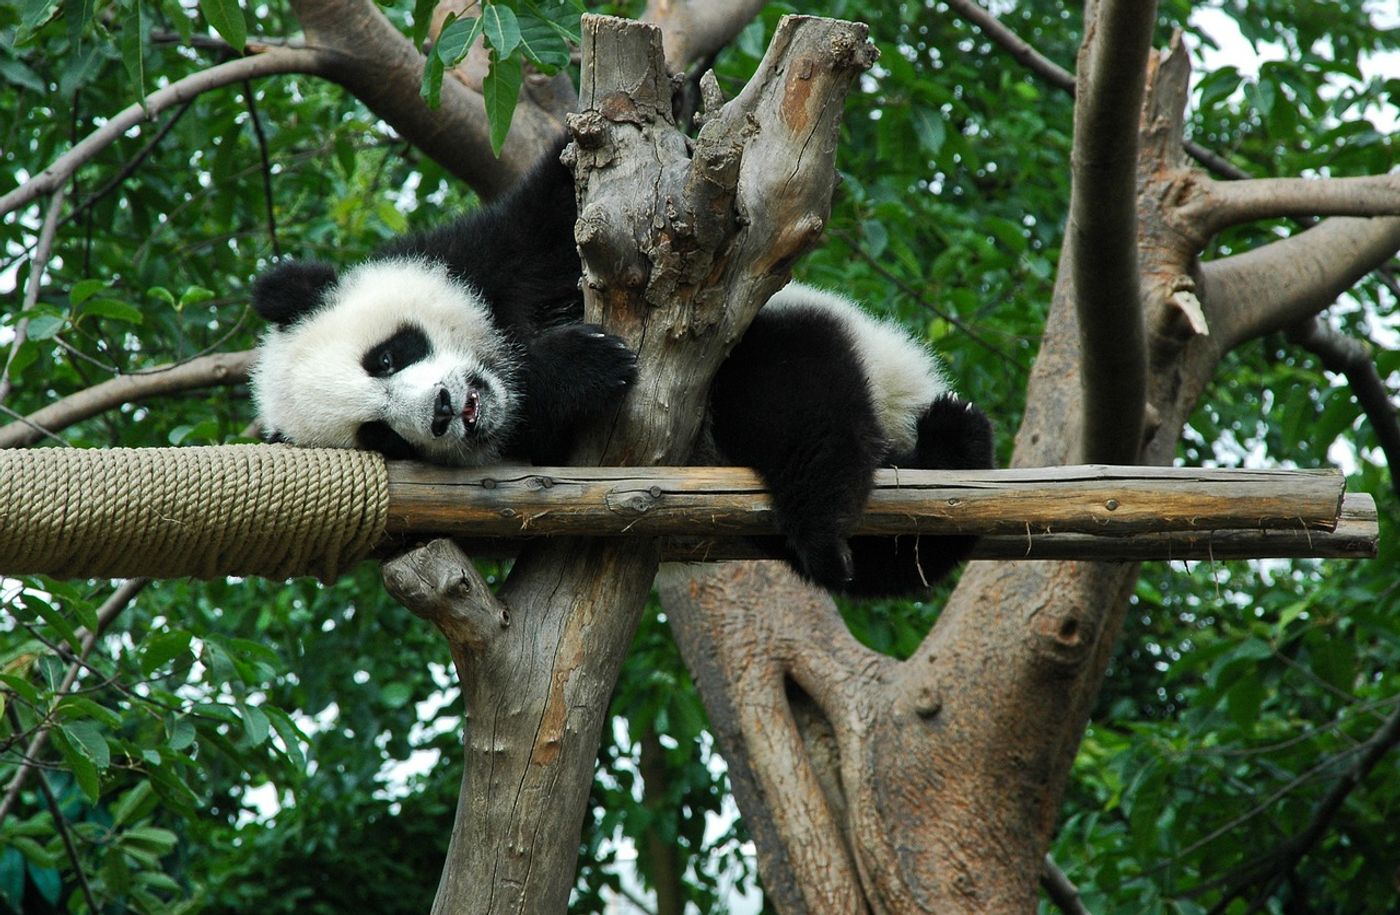 An exhausted giant panda rests in a tree.